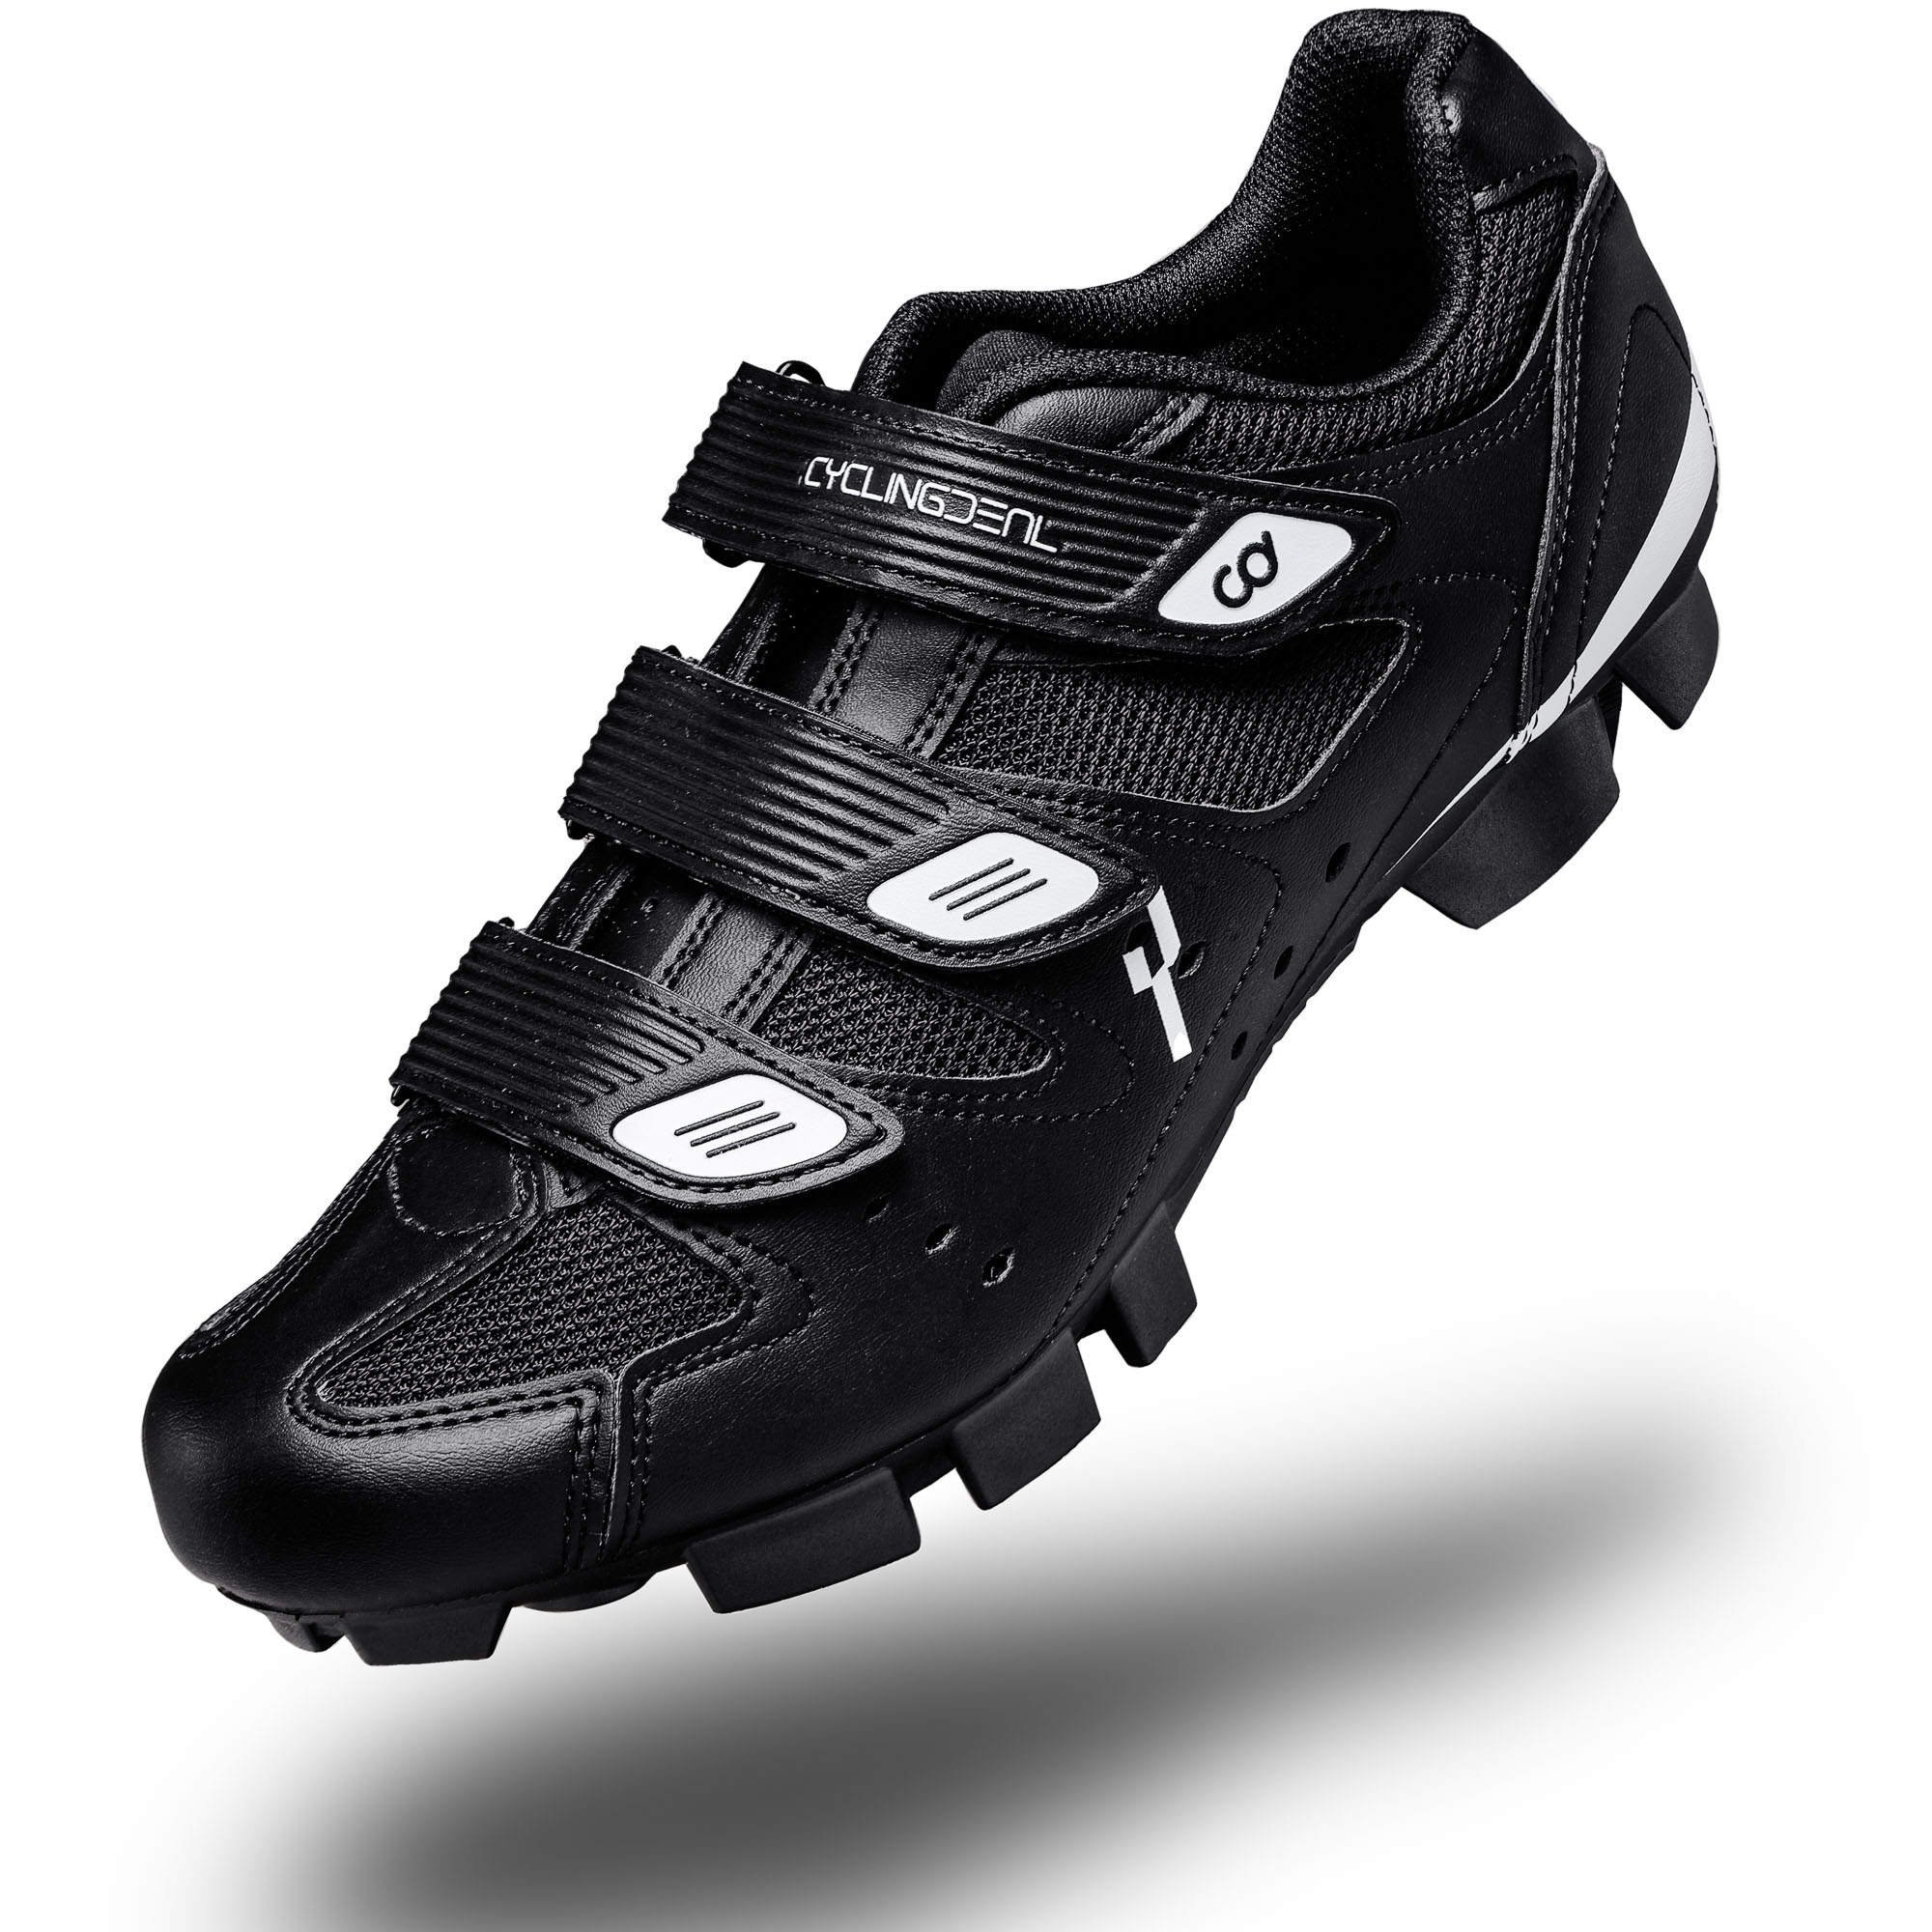 CyclingDeal Mountain Bicycle Bike Men's MTB Cycling Shoes Black Compatible with SHIMANO SPD and CrankBrothers Cleats | Size 46